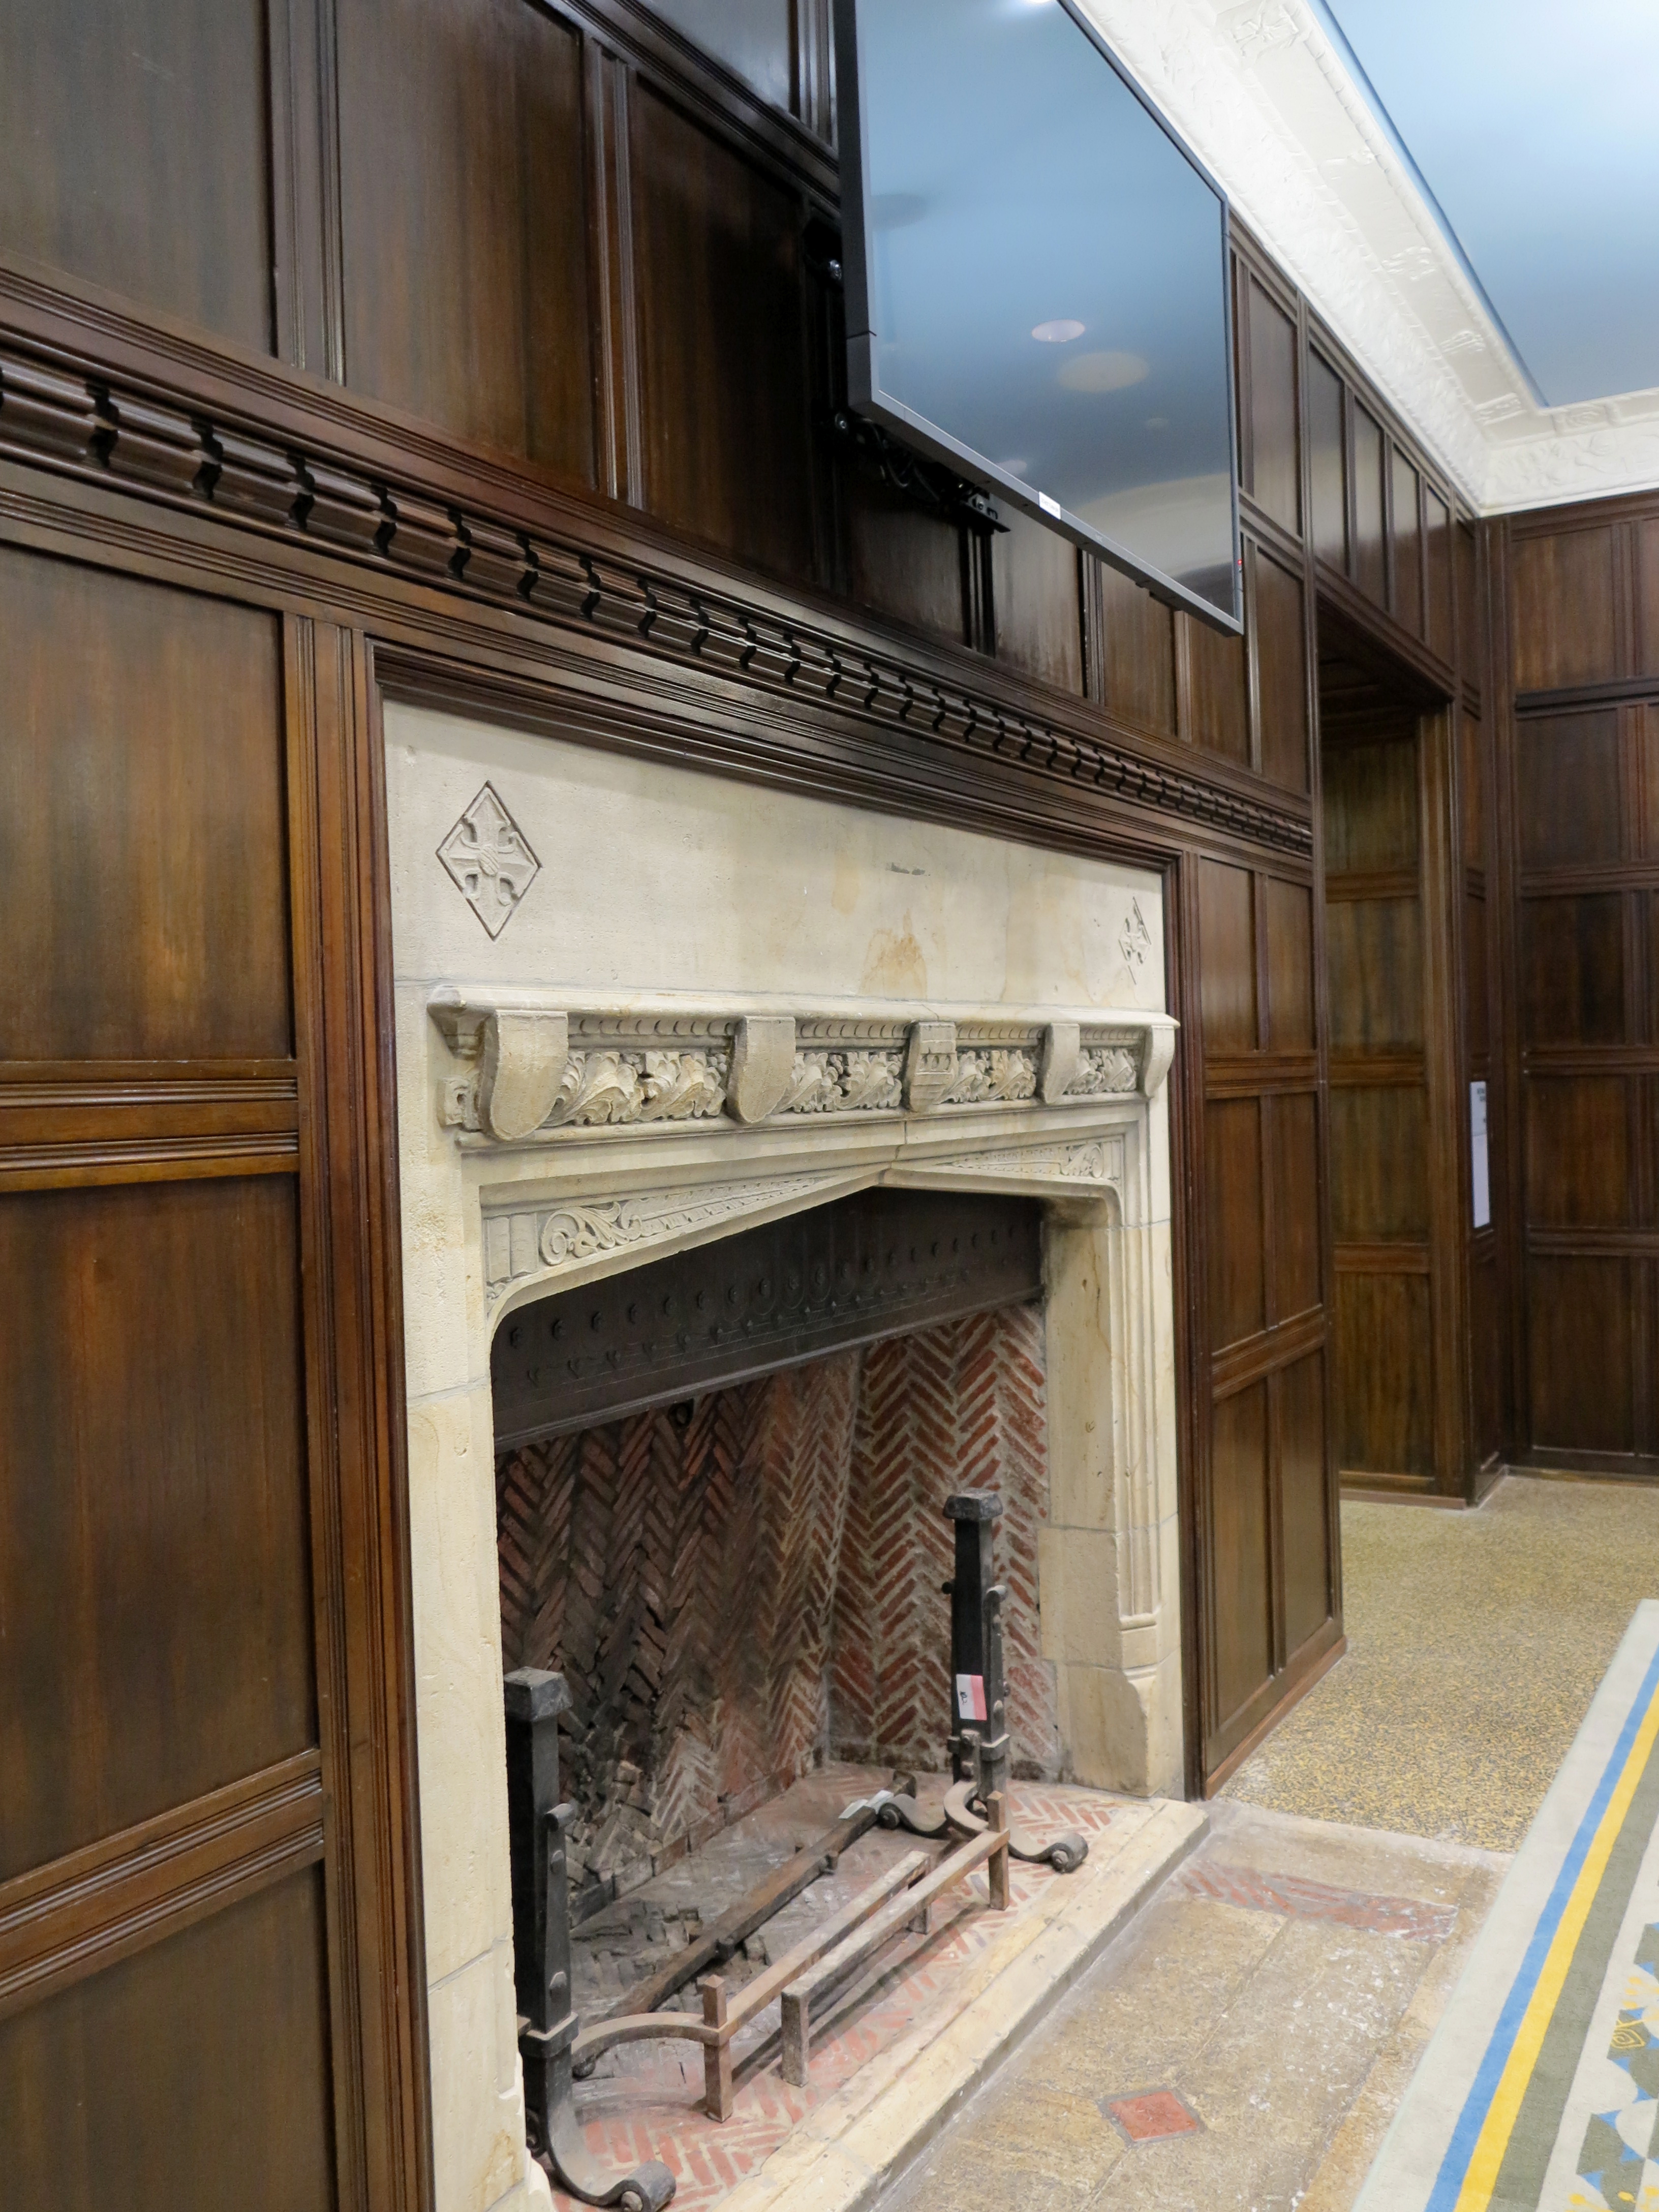 One of the ARCH's many fireplaces